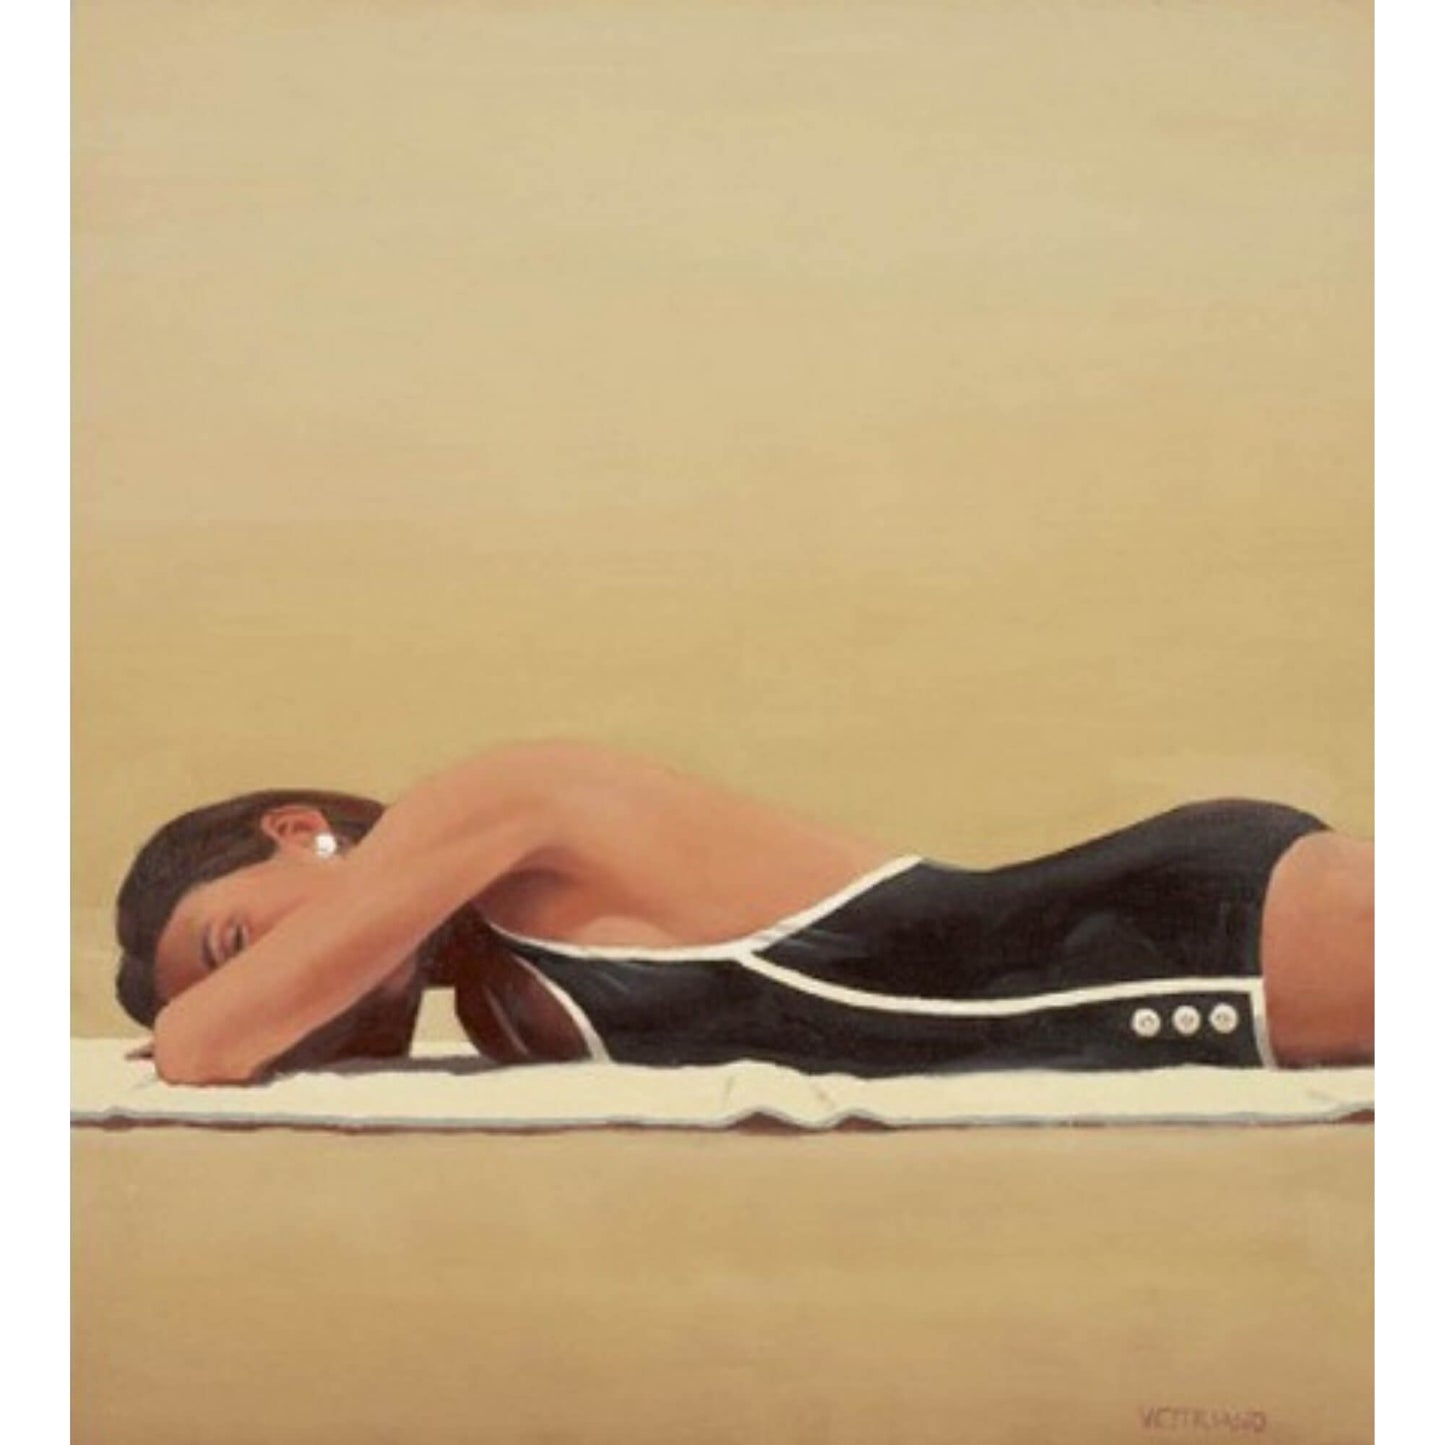 Scorched Limited Edition Print Jack Vettriano 